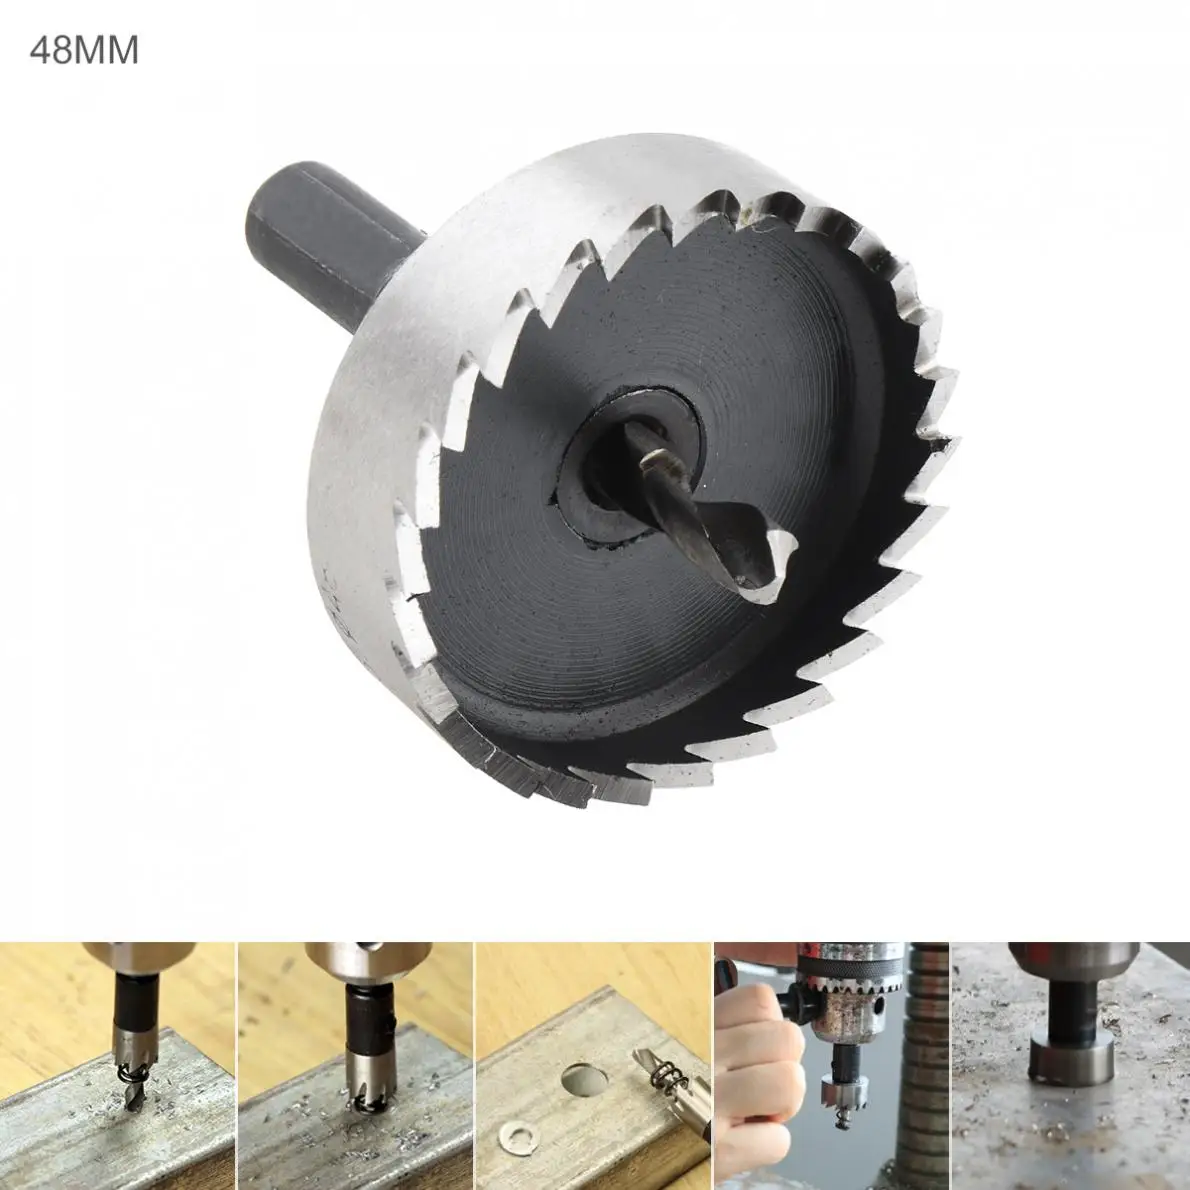 Durable 40mm / 48mm HSS Hole Saw Cutter Drill Bits for Pistol / Bench / Magnetic / Air Gun Drills